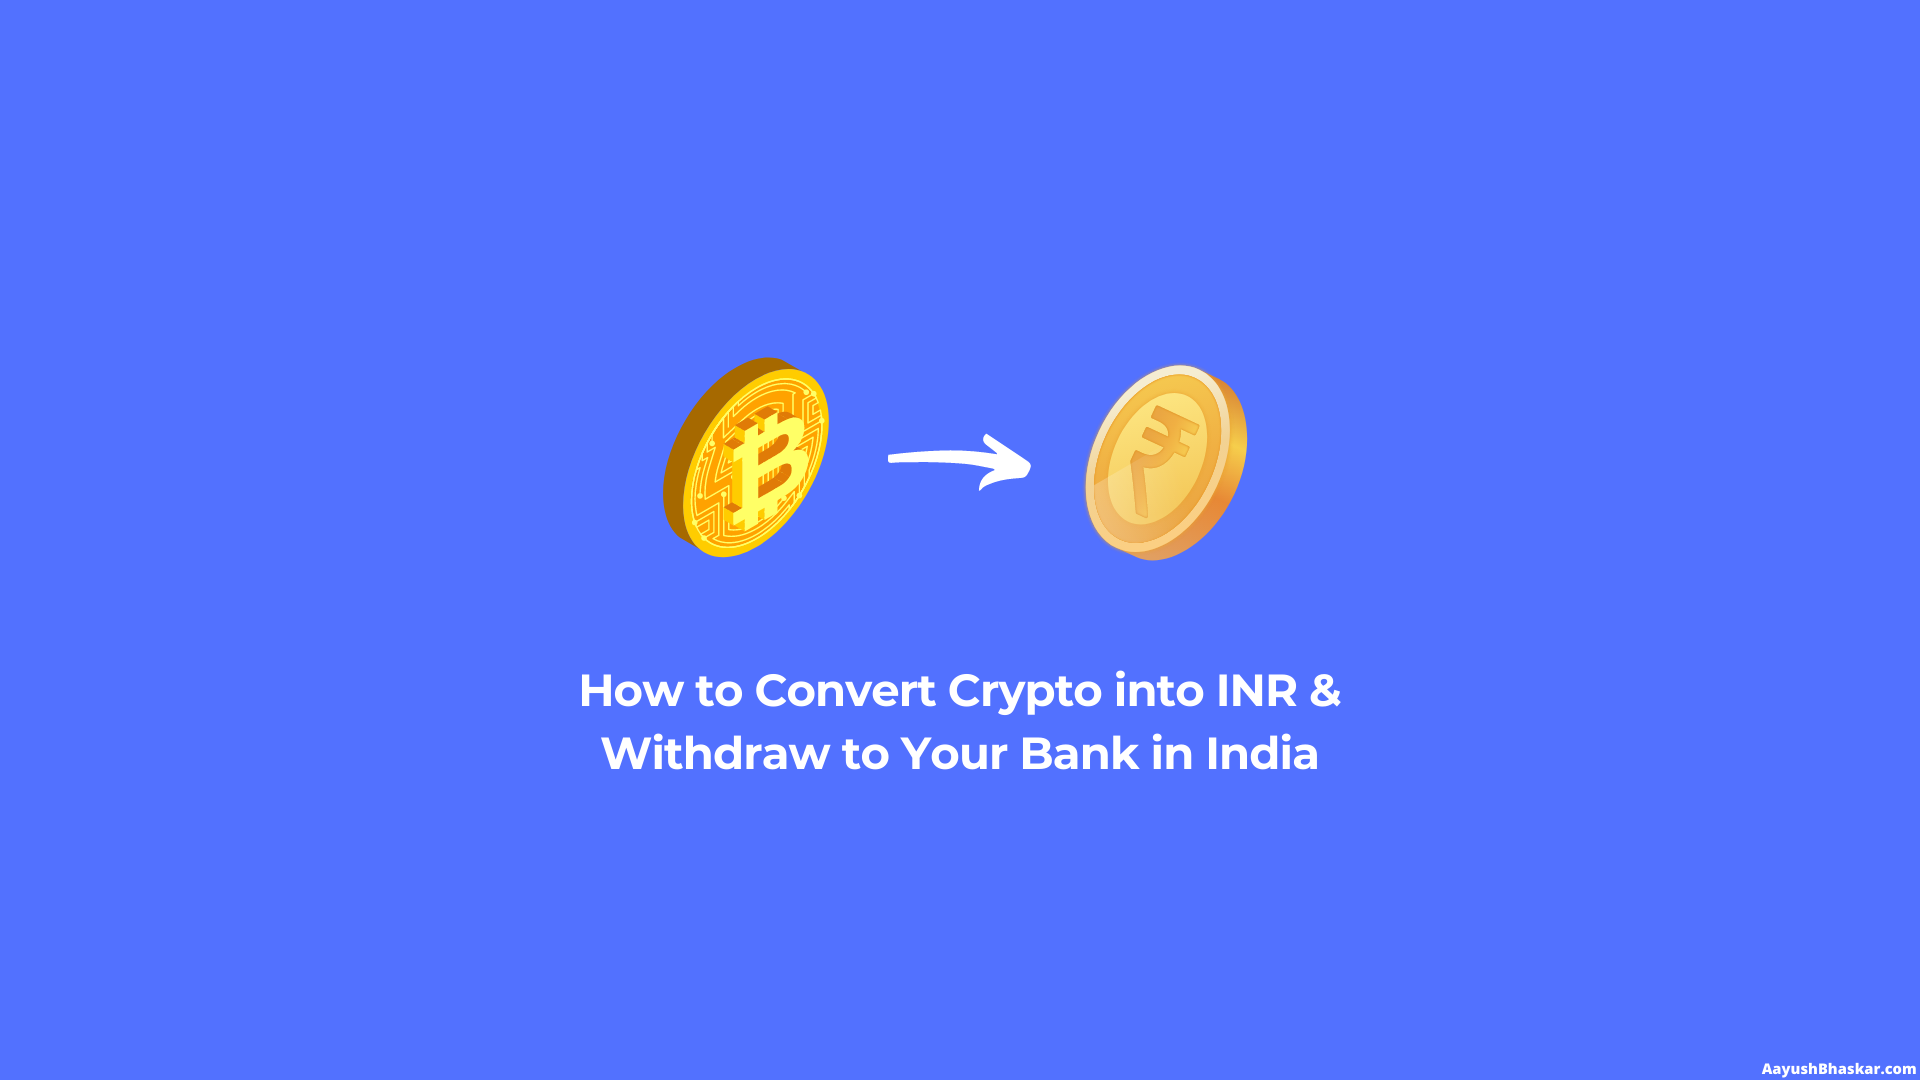 BTC to INR | Convert Bitcoin to Indian Rupees | Revolut United Kingdom